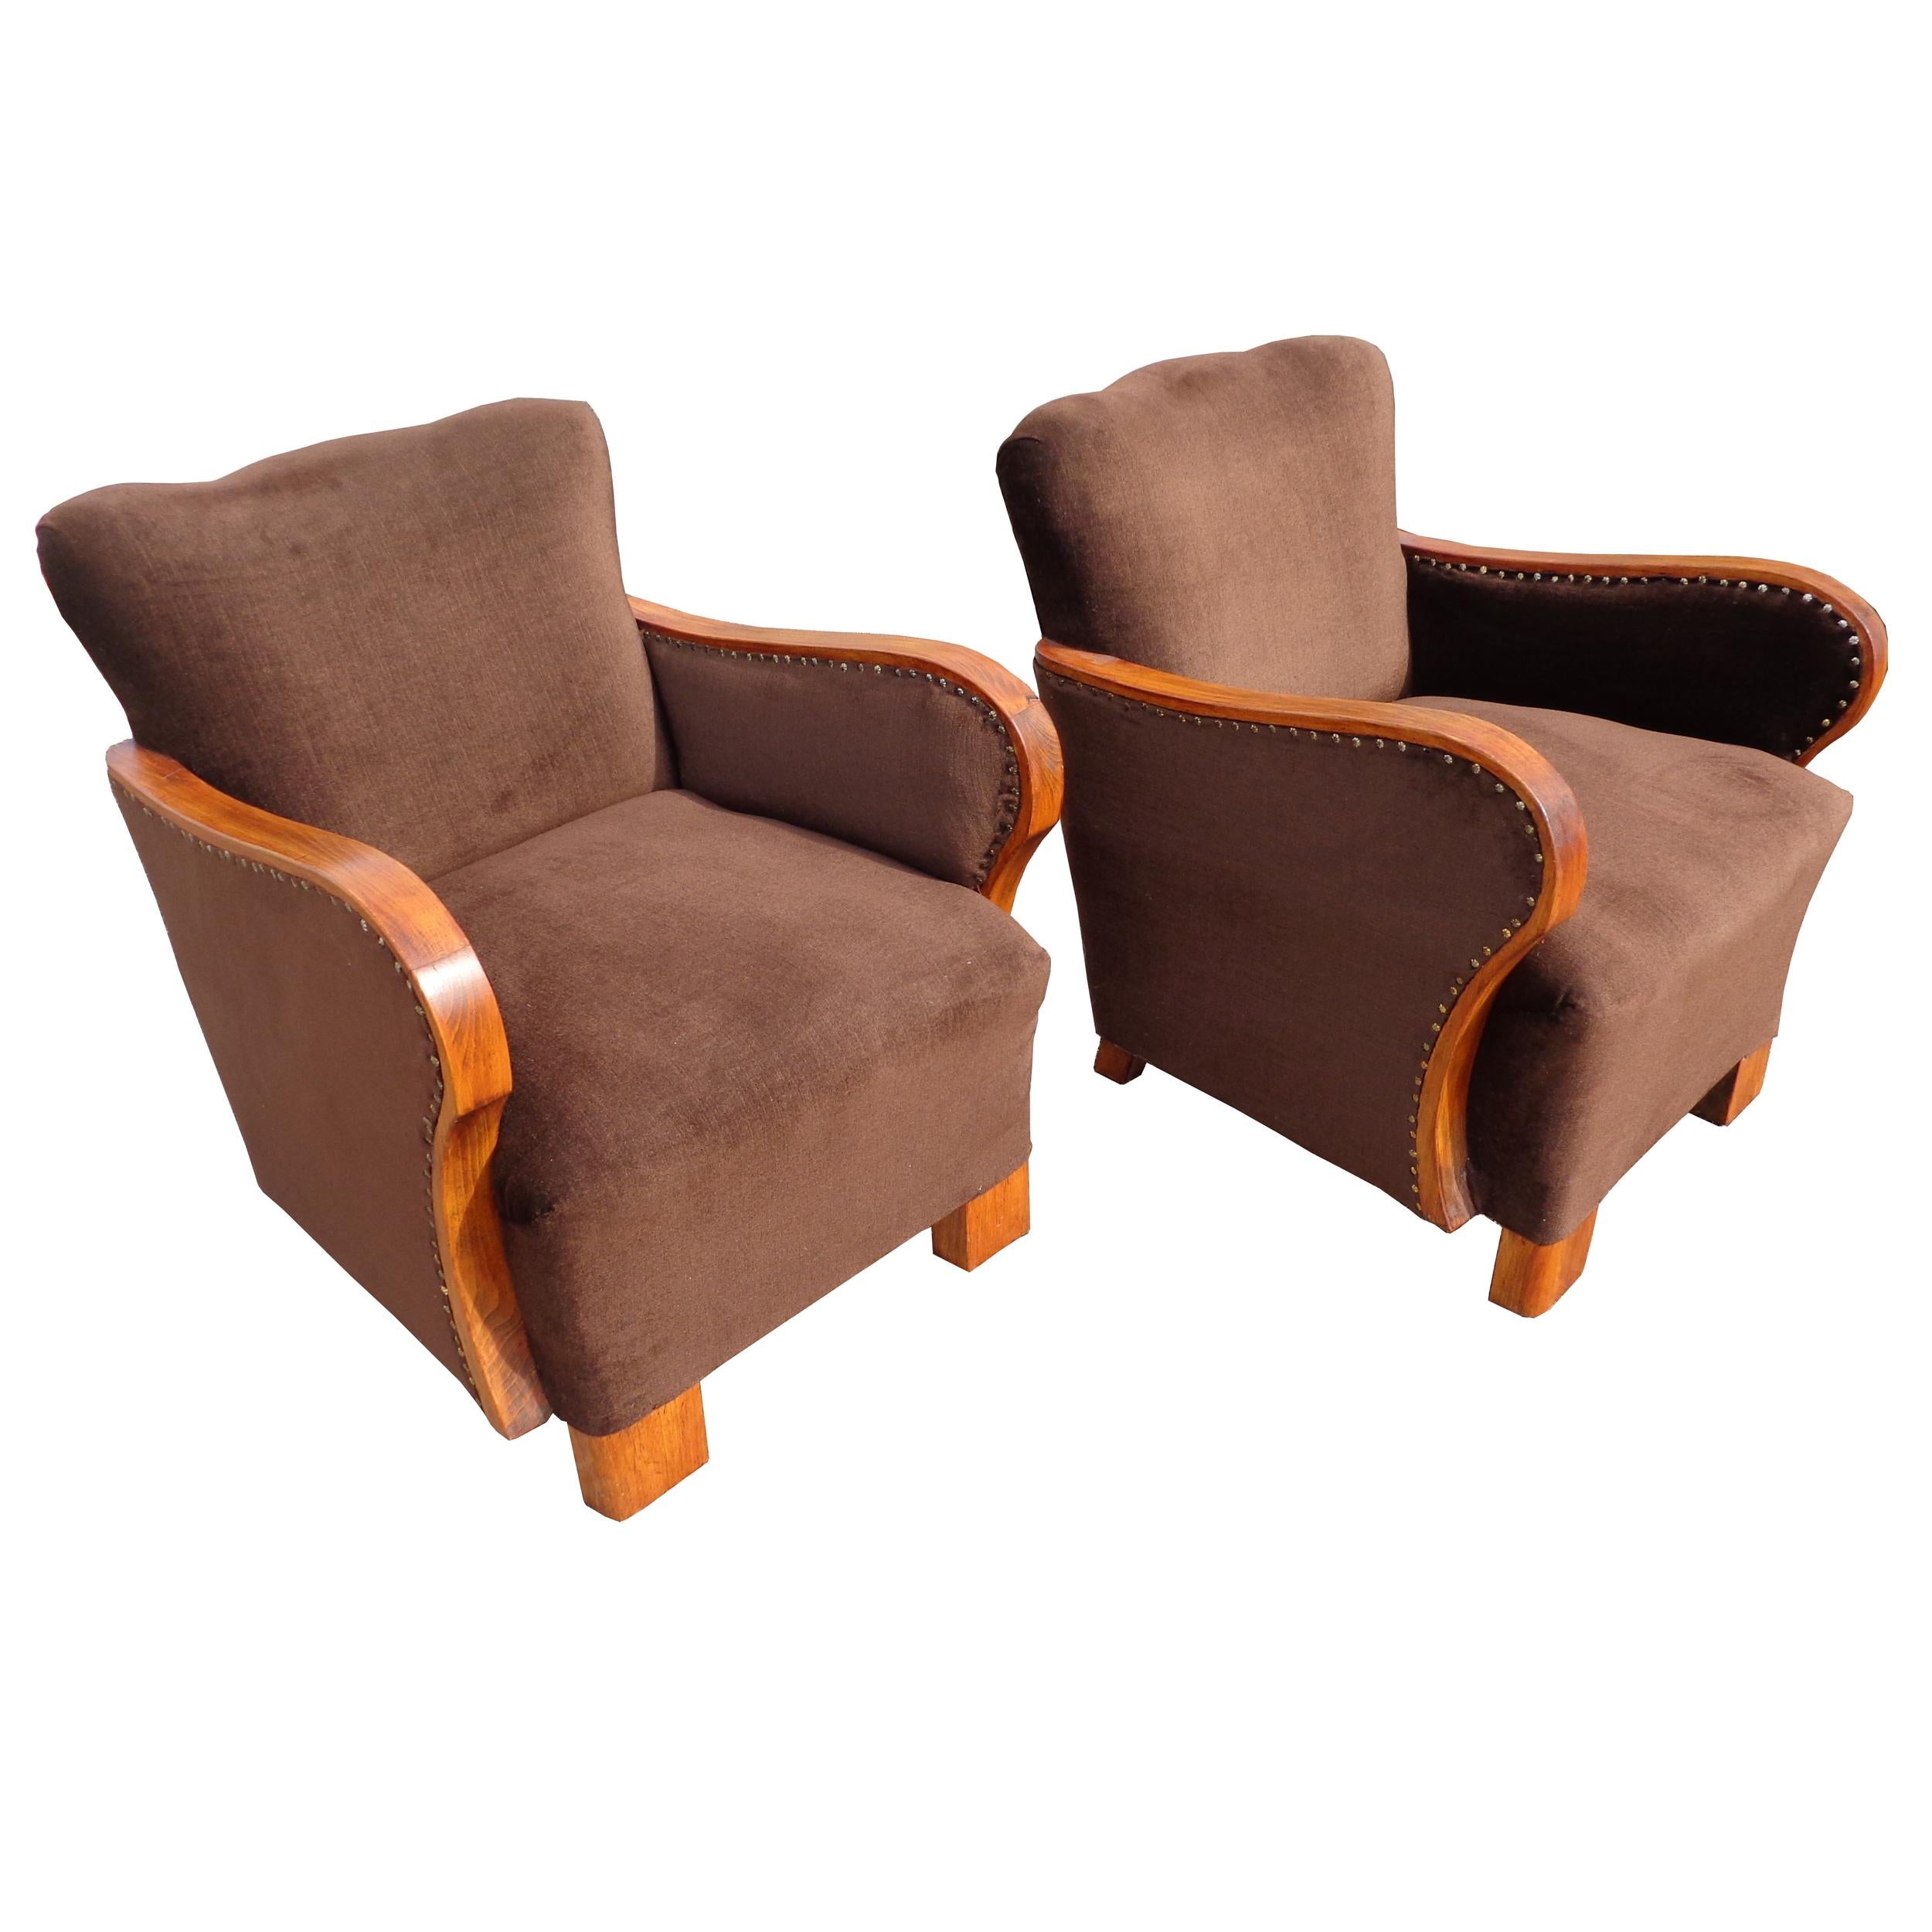 Pair of Original 1930’s Art Deco Lounge Chairs For Sale